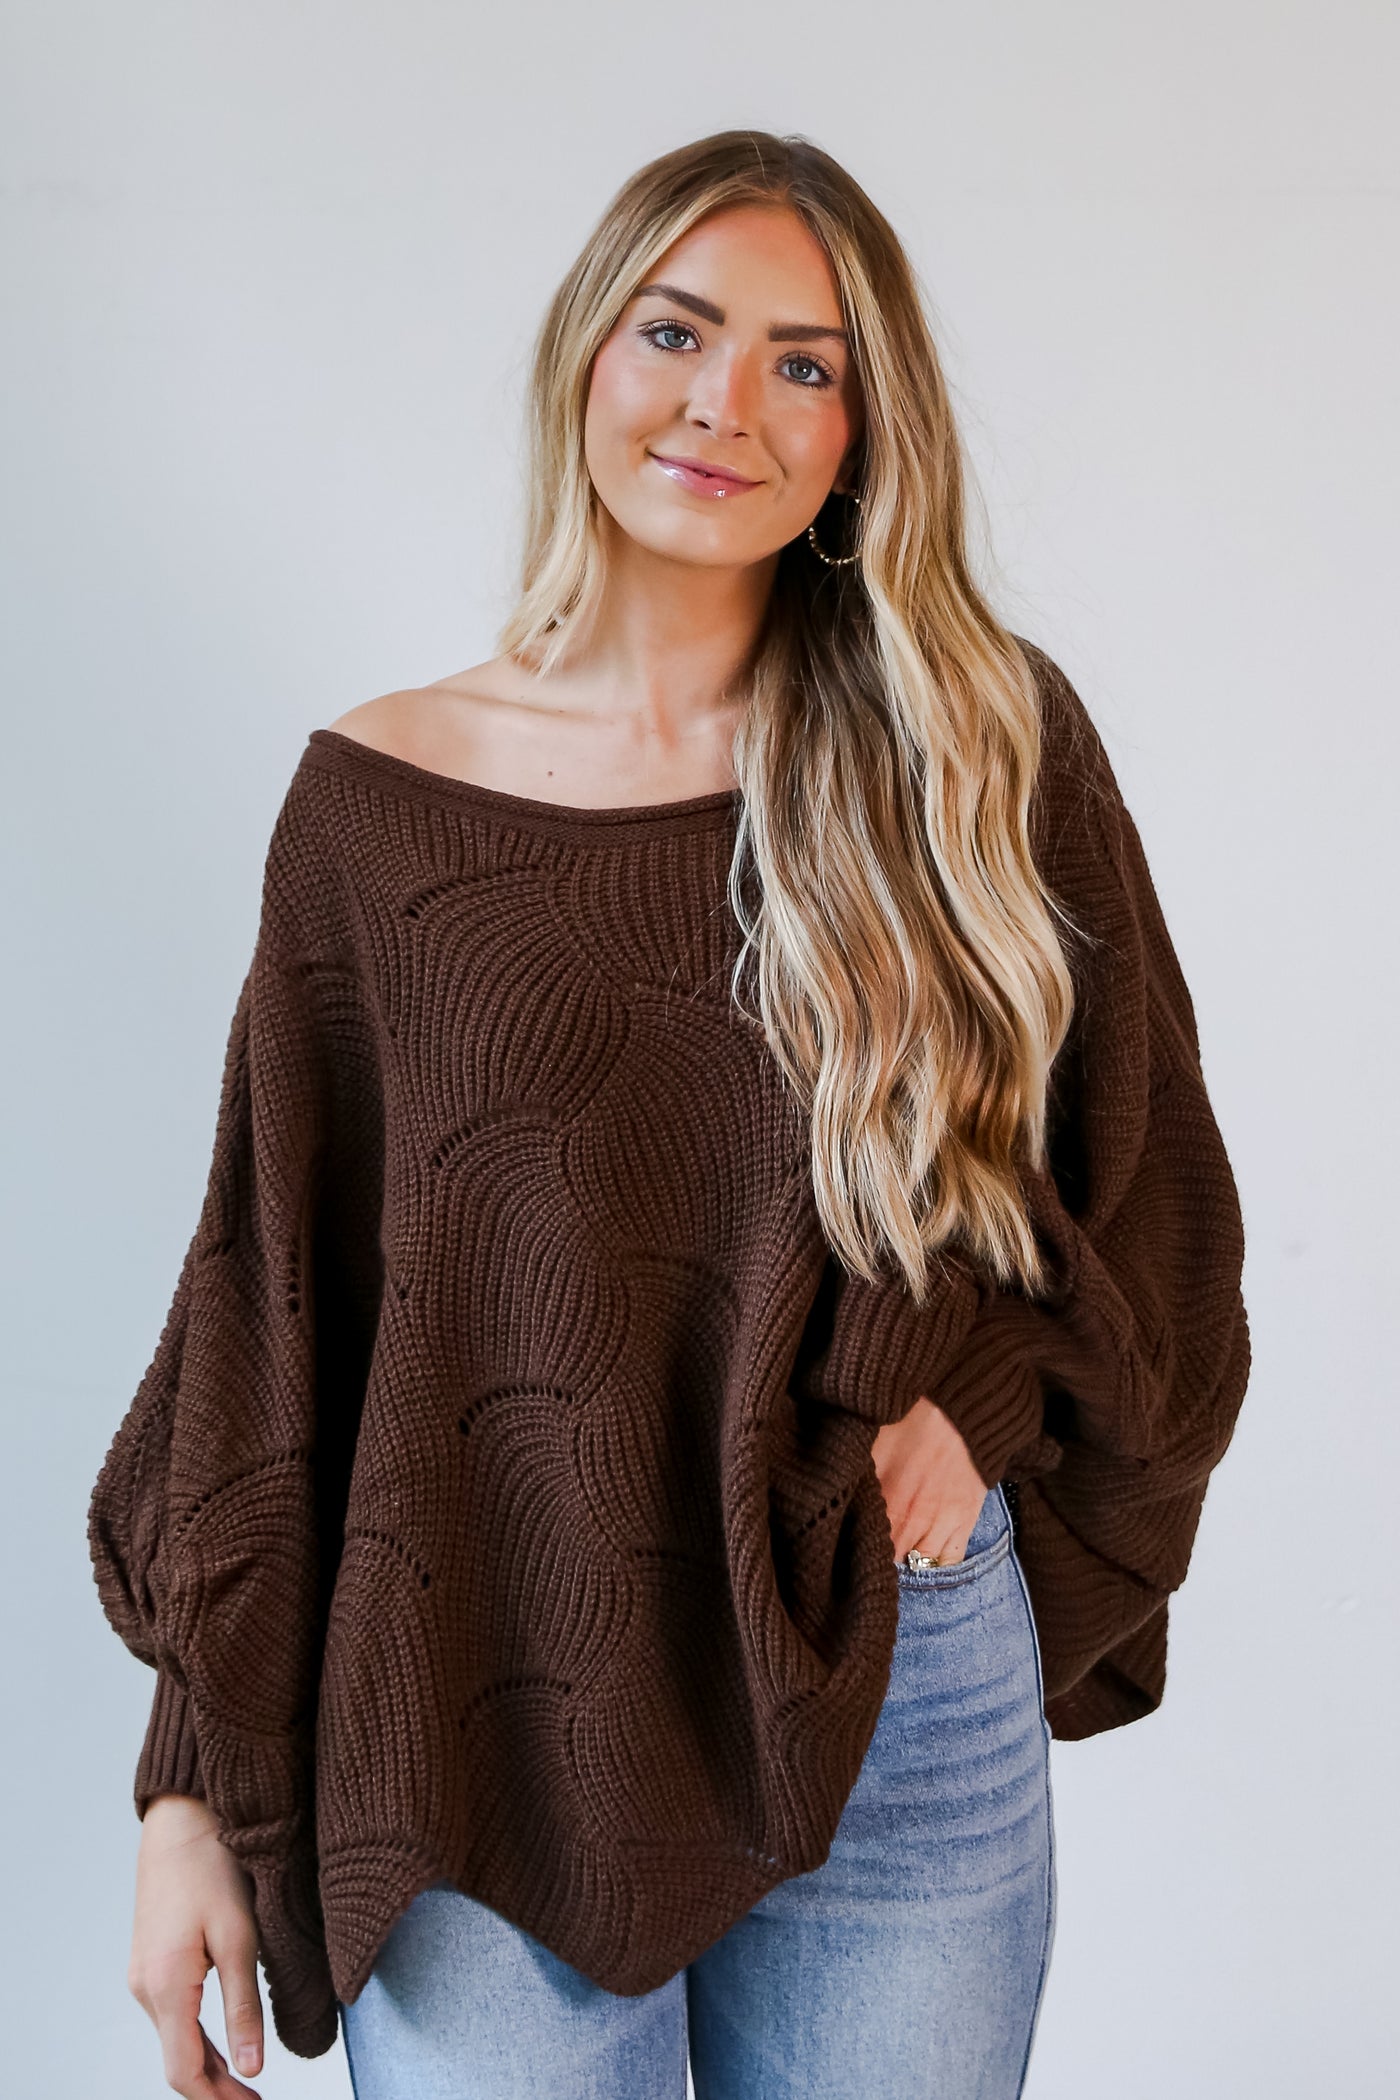 brown Oversized Sweater front view